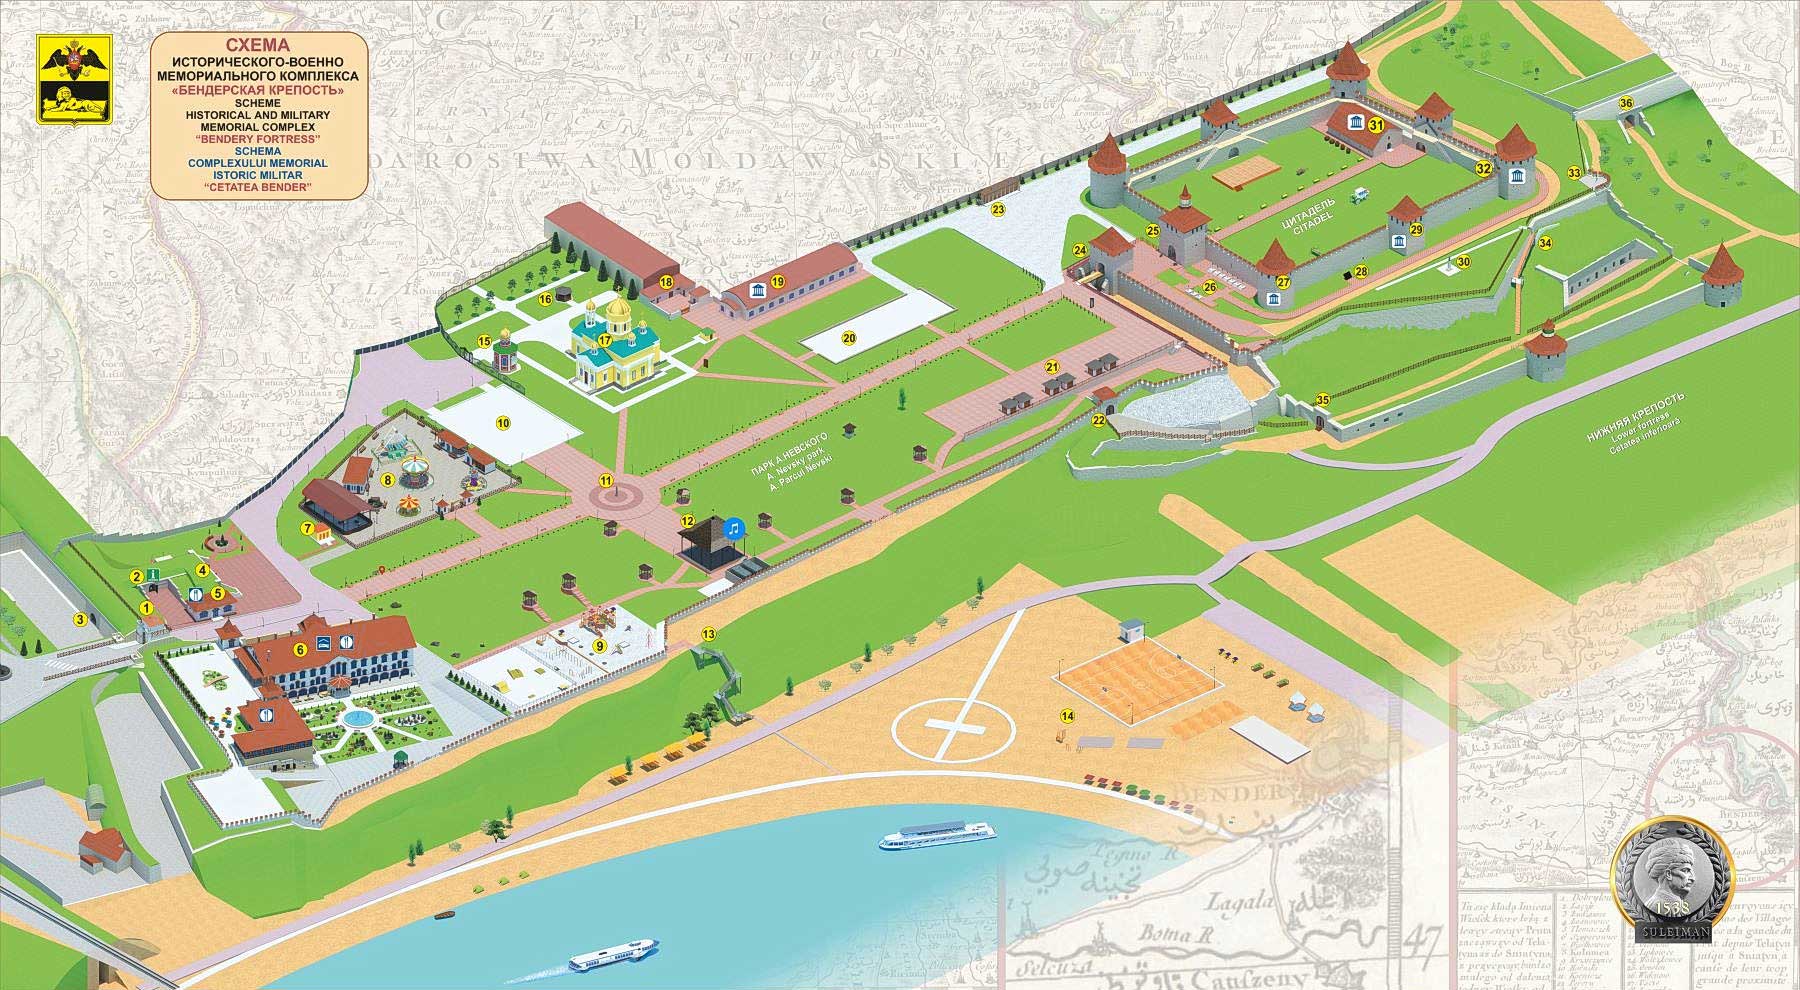 Scheme of the historical military memorial complex "Bendery Fortress"